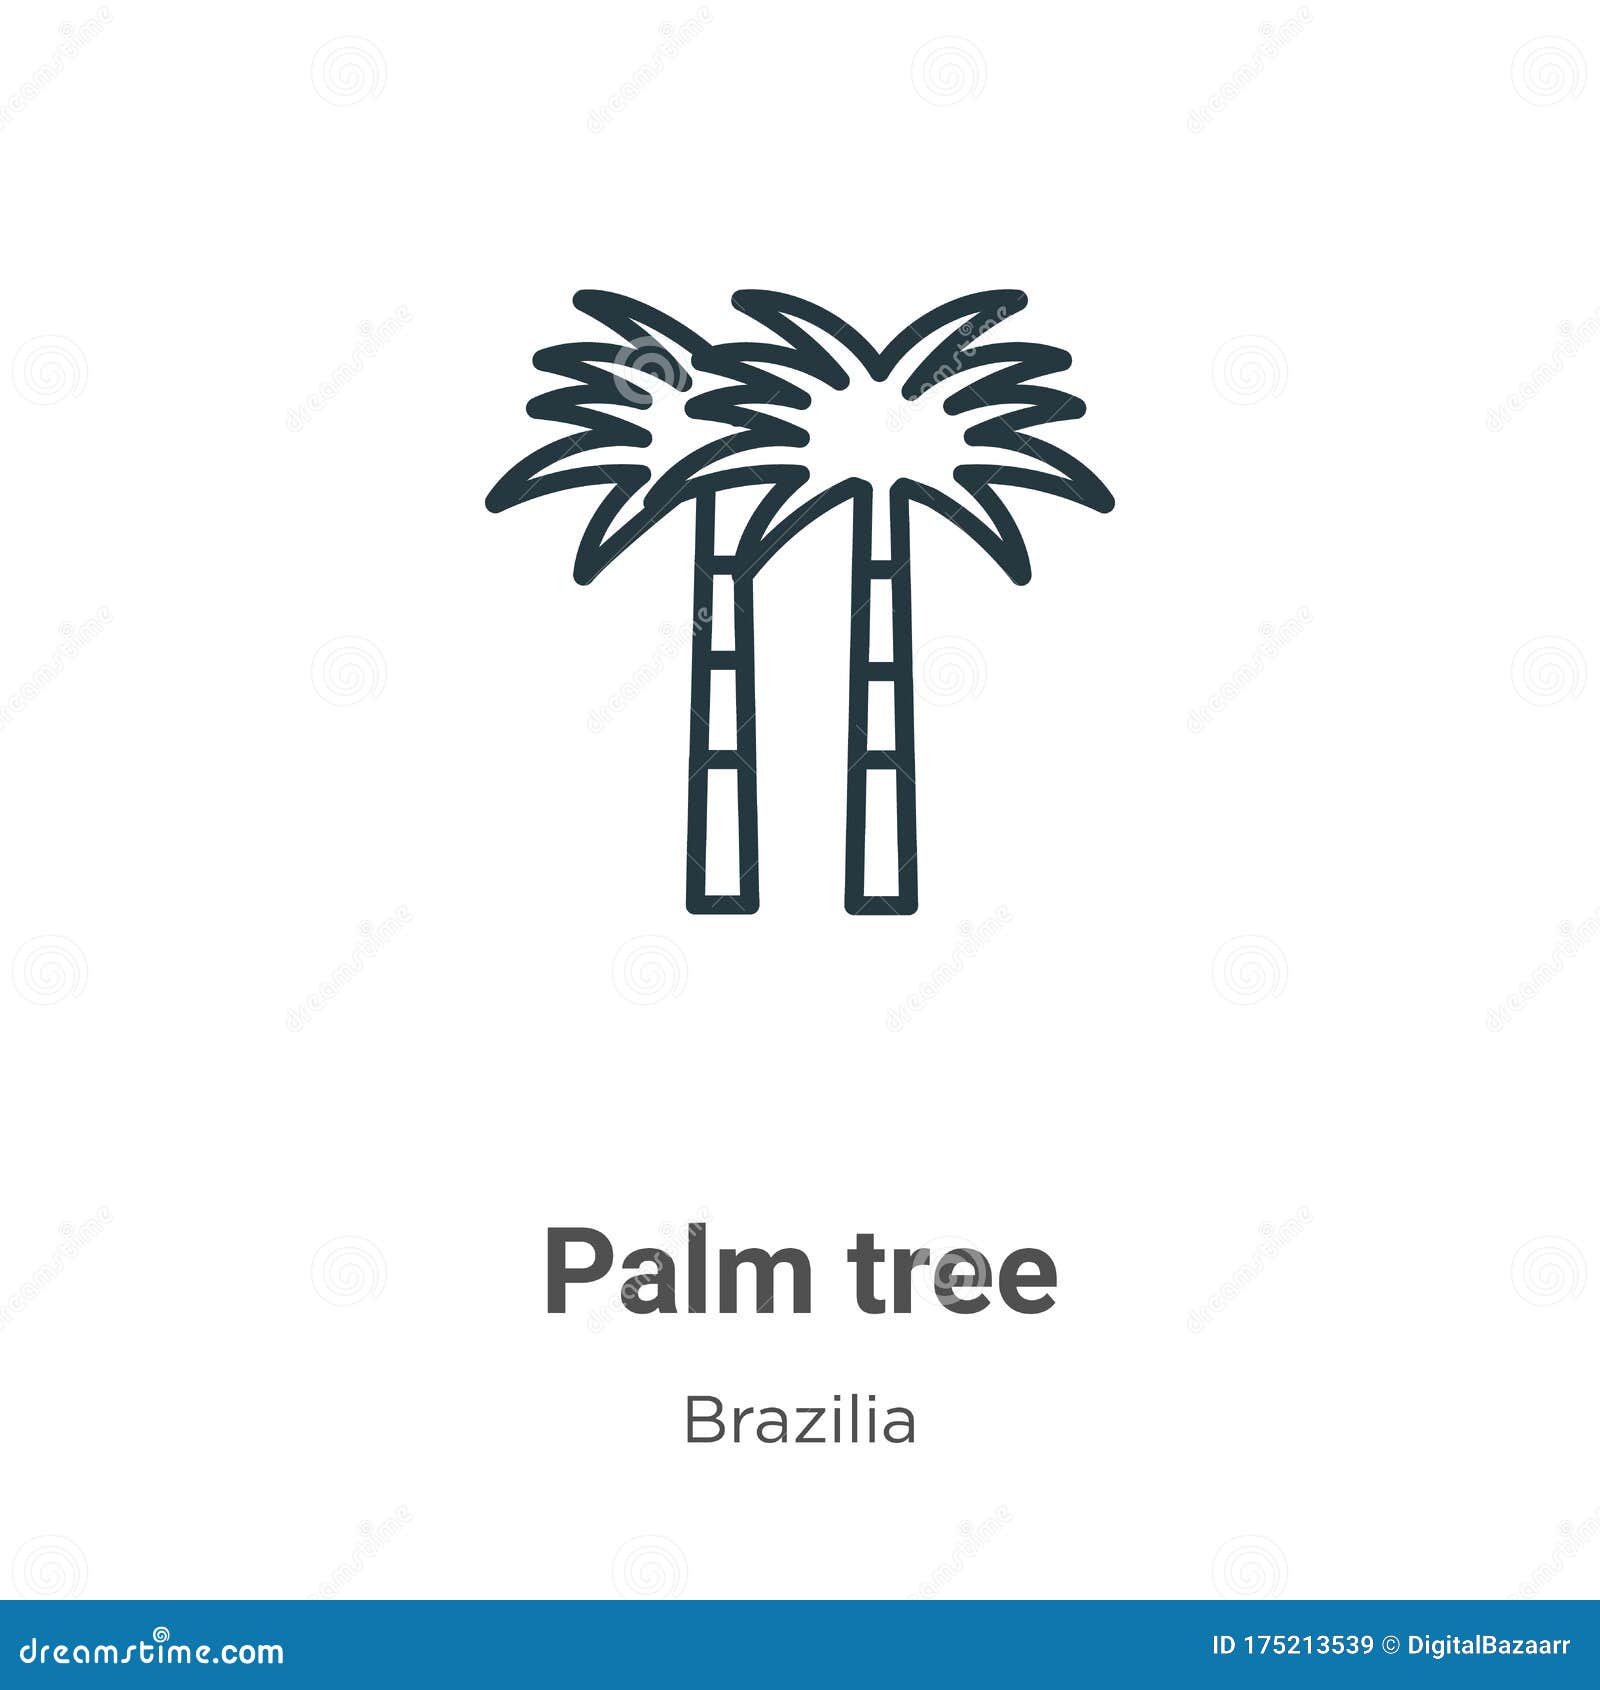 palm tree outline  icon. thin line black palm tree icon, flat  simple   from editable brazilia